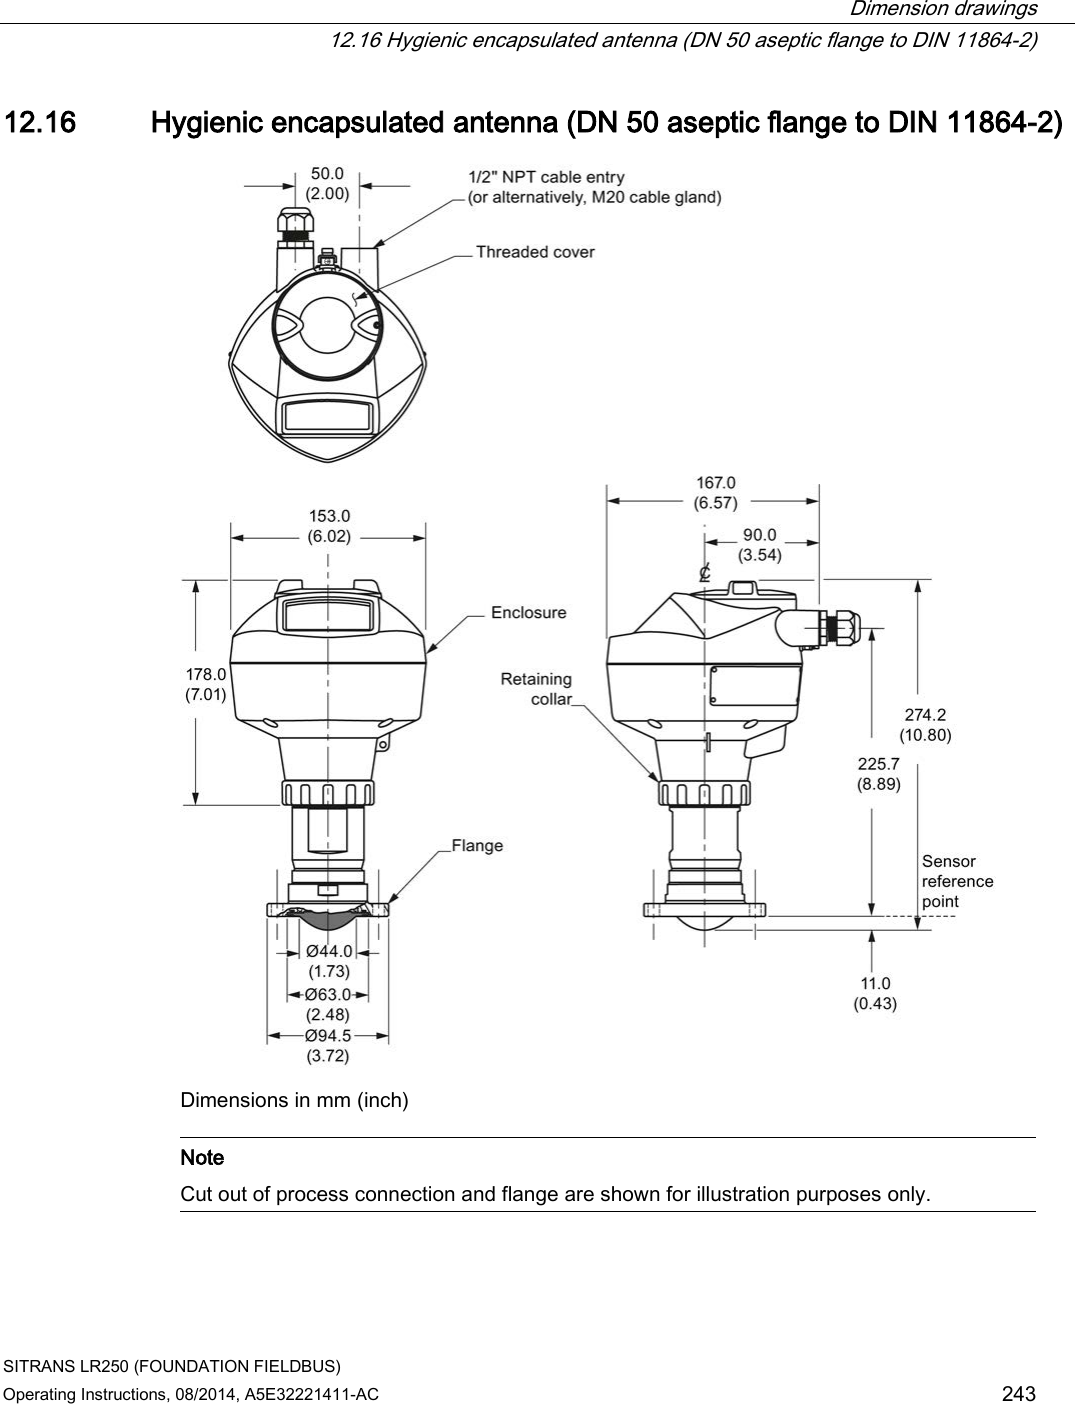  Dimension drawings  12.16 Hygienic encapsulated antenna (DN 50 aseptic flange to DIN 11864-2) SITRANS LR250 (FOUNDATION FIELDBUS) Operating Instructions, 08/2014, A5E32221411-AC 243 12.16 Hygienic encapsulated antenna (DN 50 aseptic flange to DIN 11864-2)  Dimensions in mm (inch)   Note Cut out of process connection and flange are shown for illustration purposes only.   